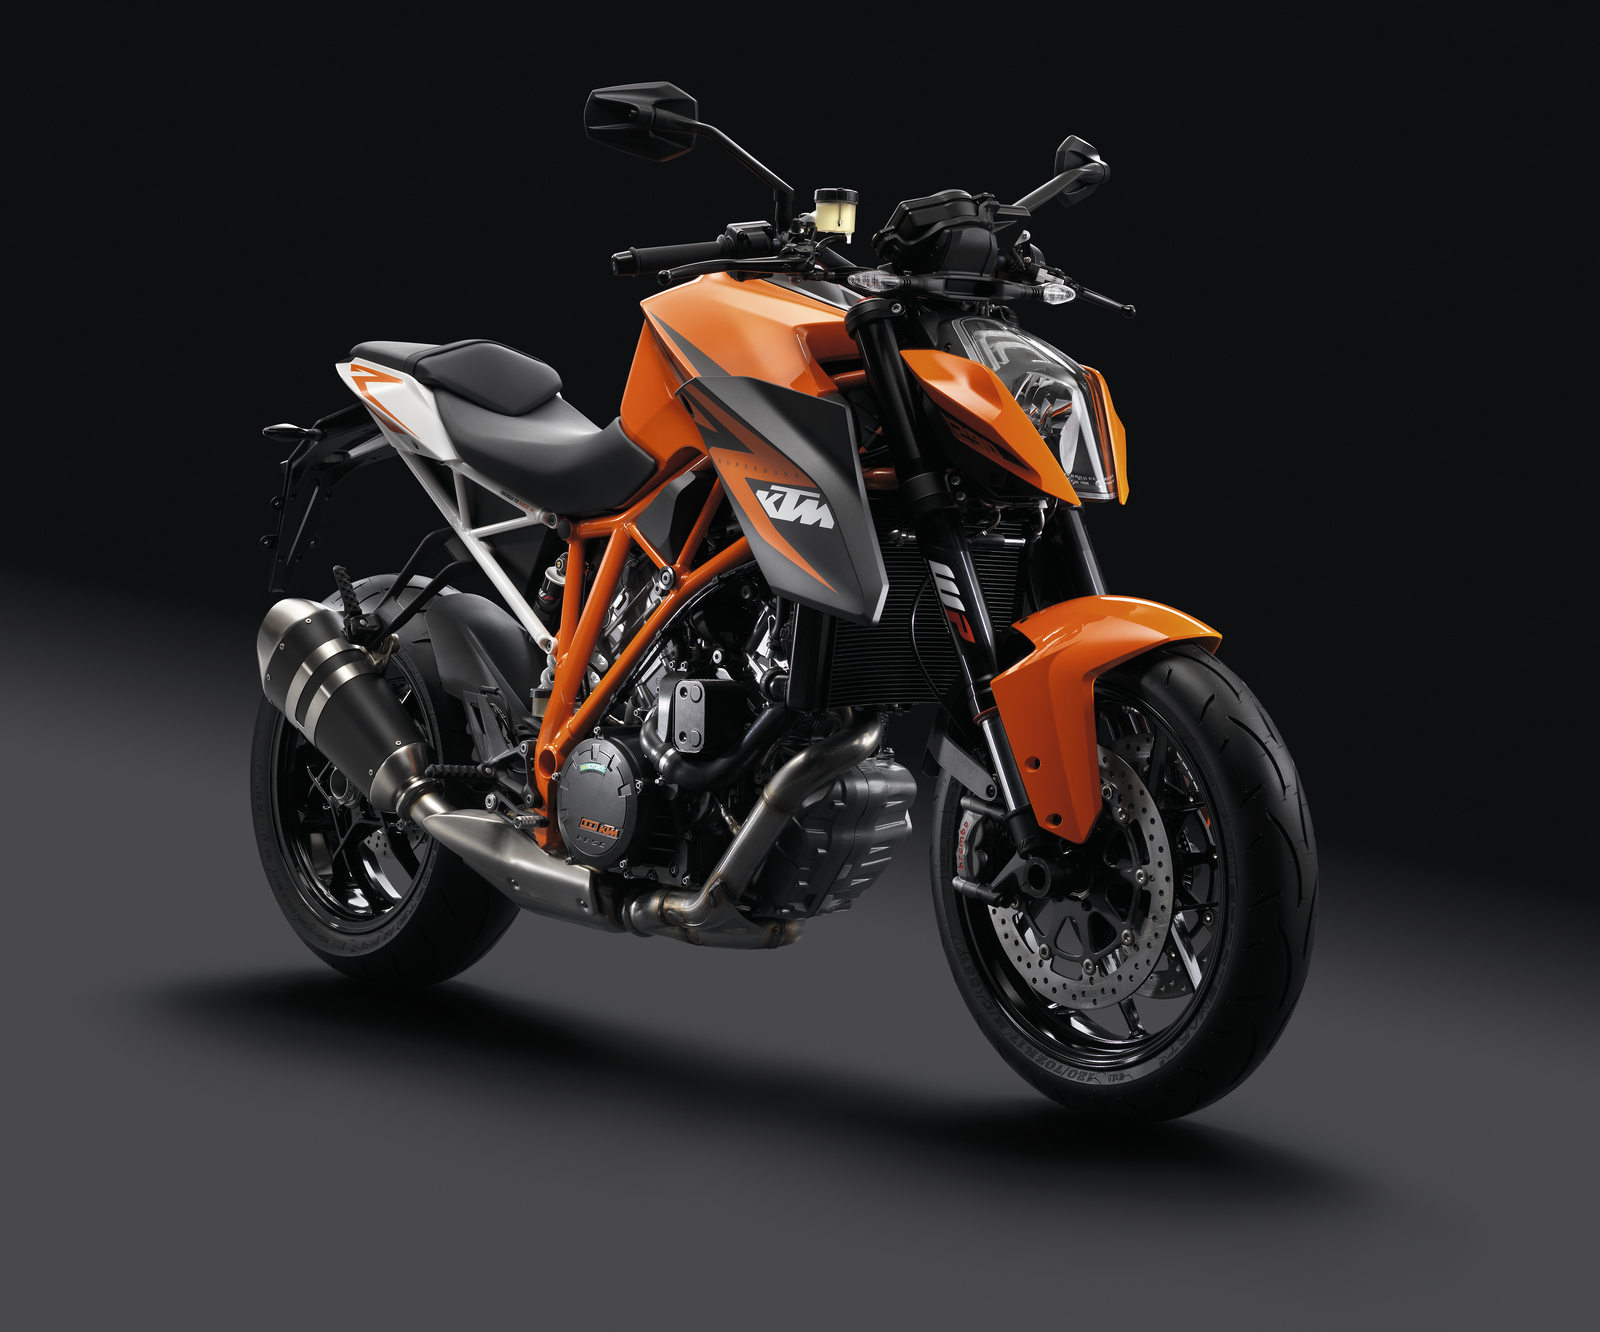 KTM North America Launches Sales Promotion On 1290 Super Duke R